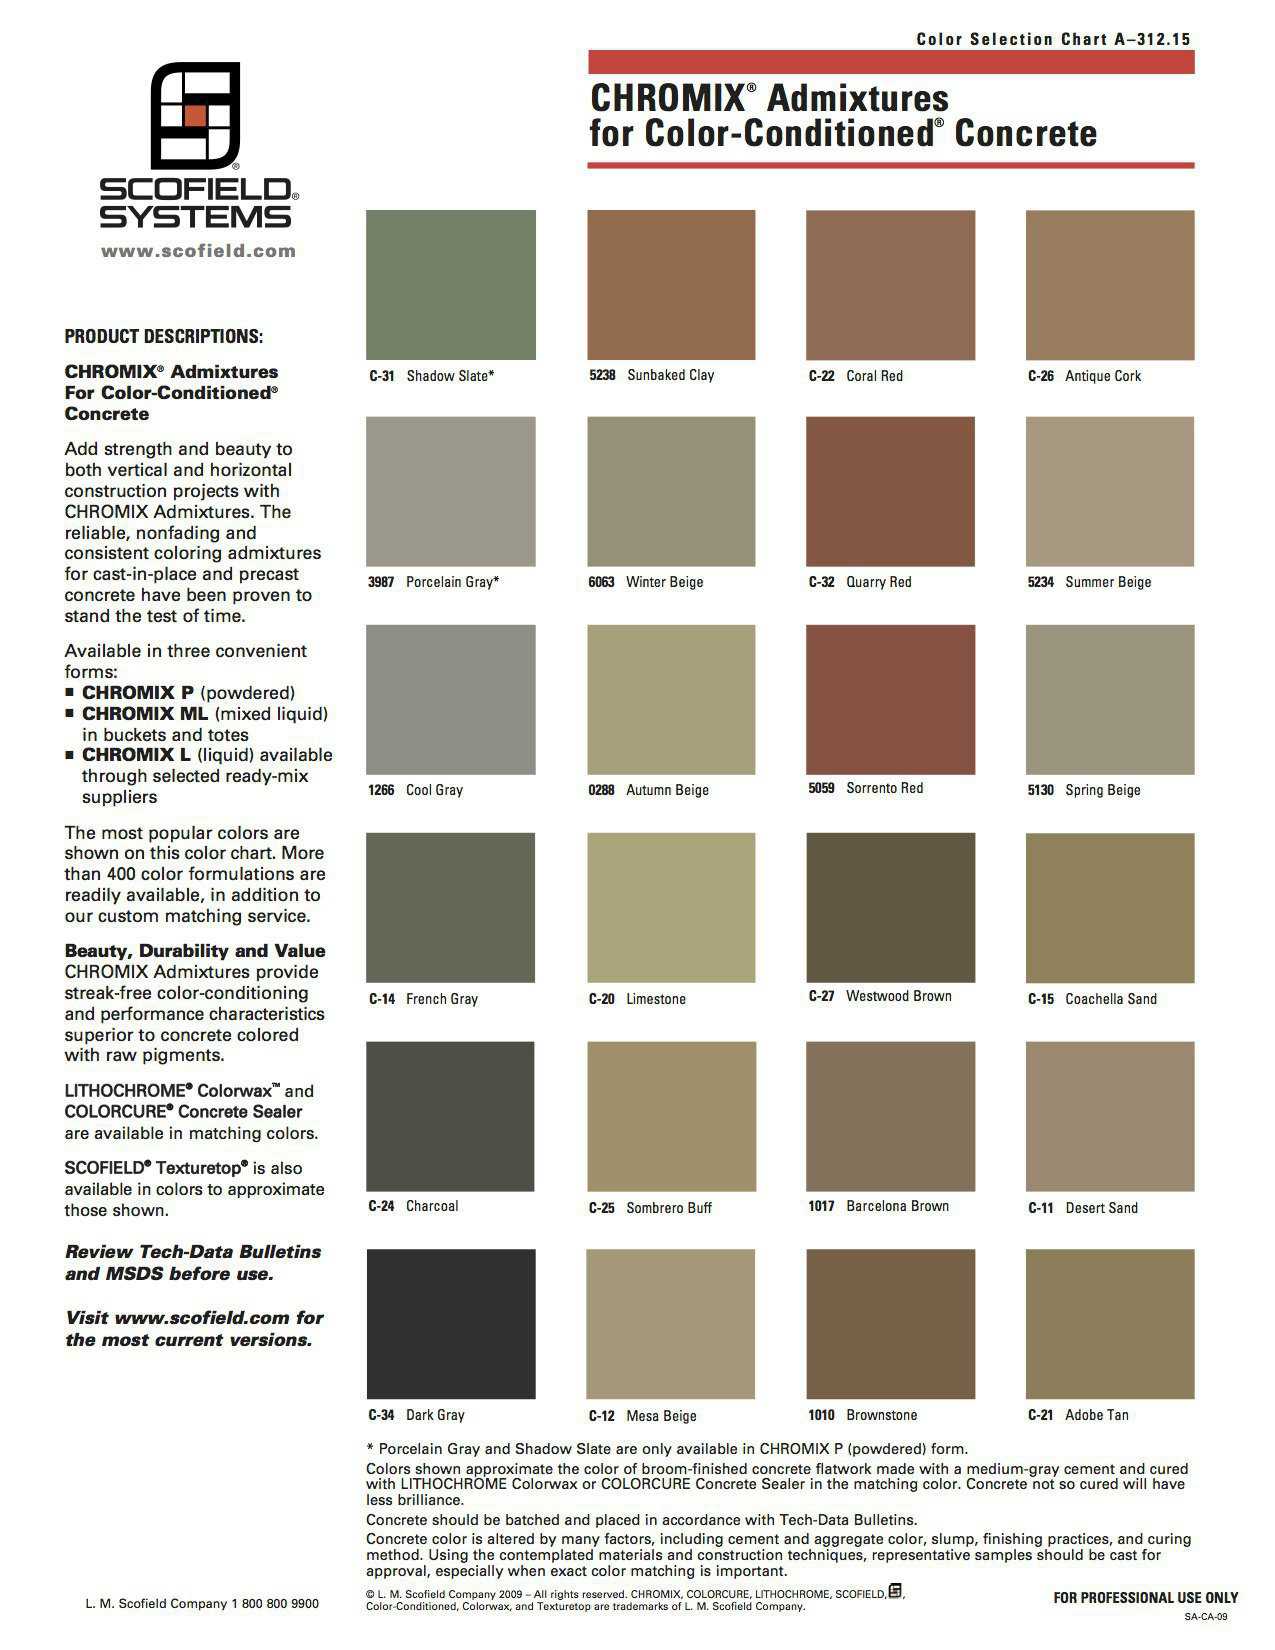 Scofield Systems Color Chart